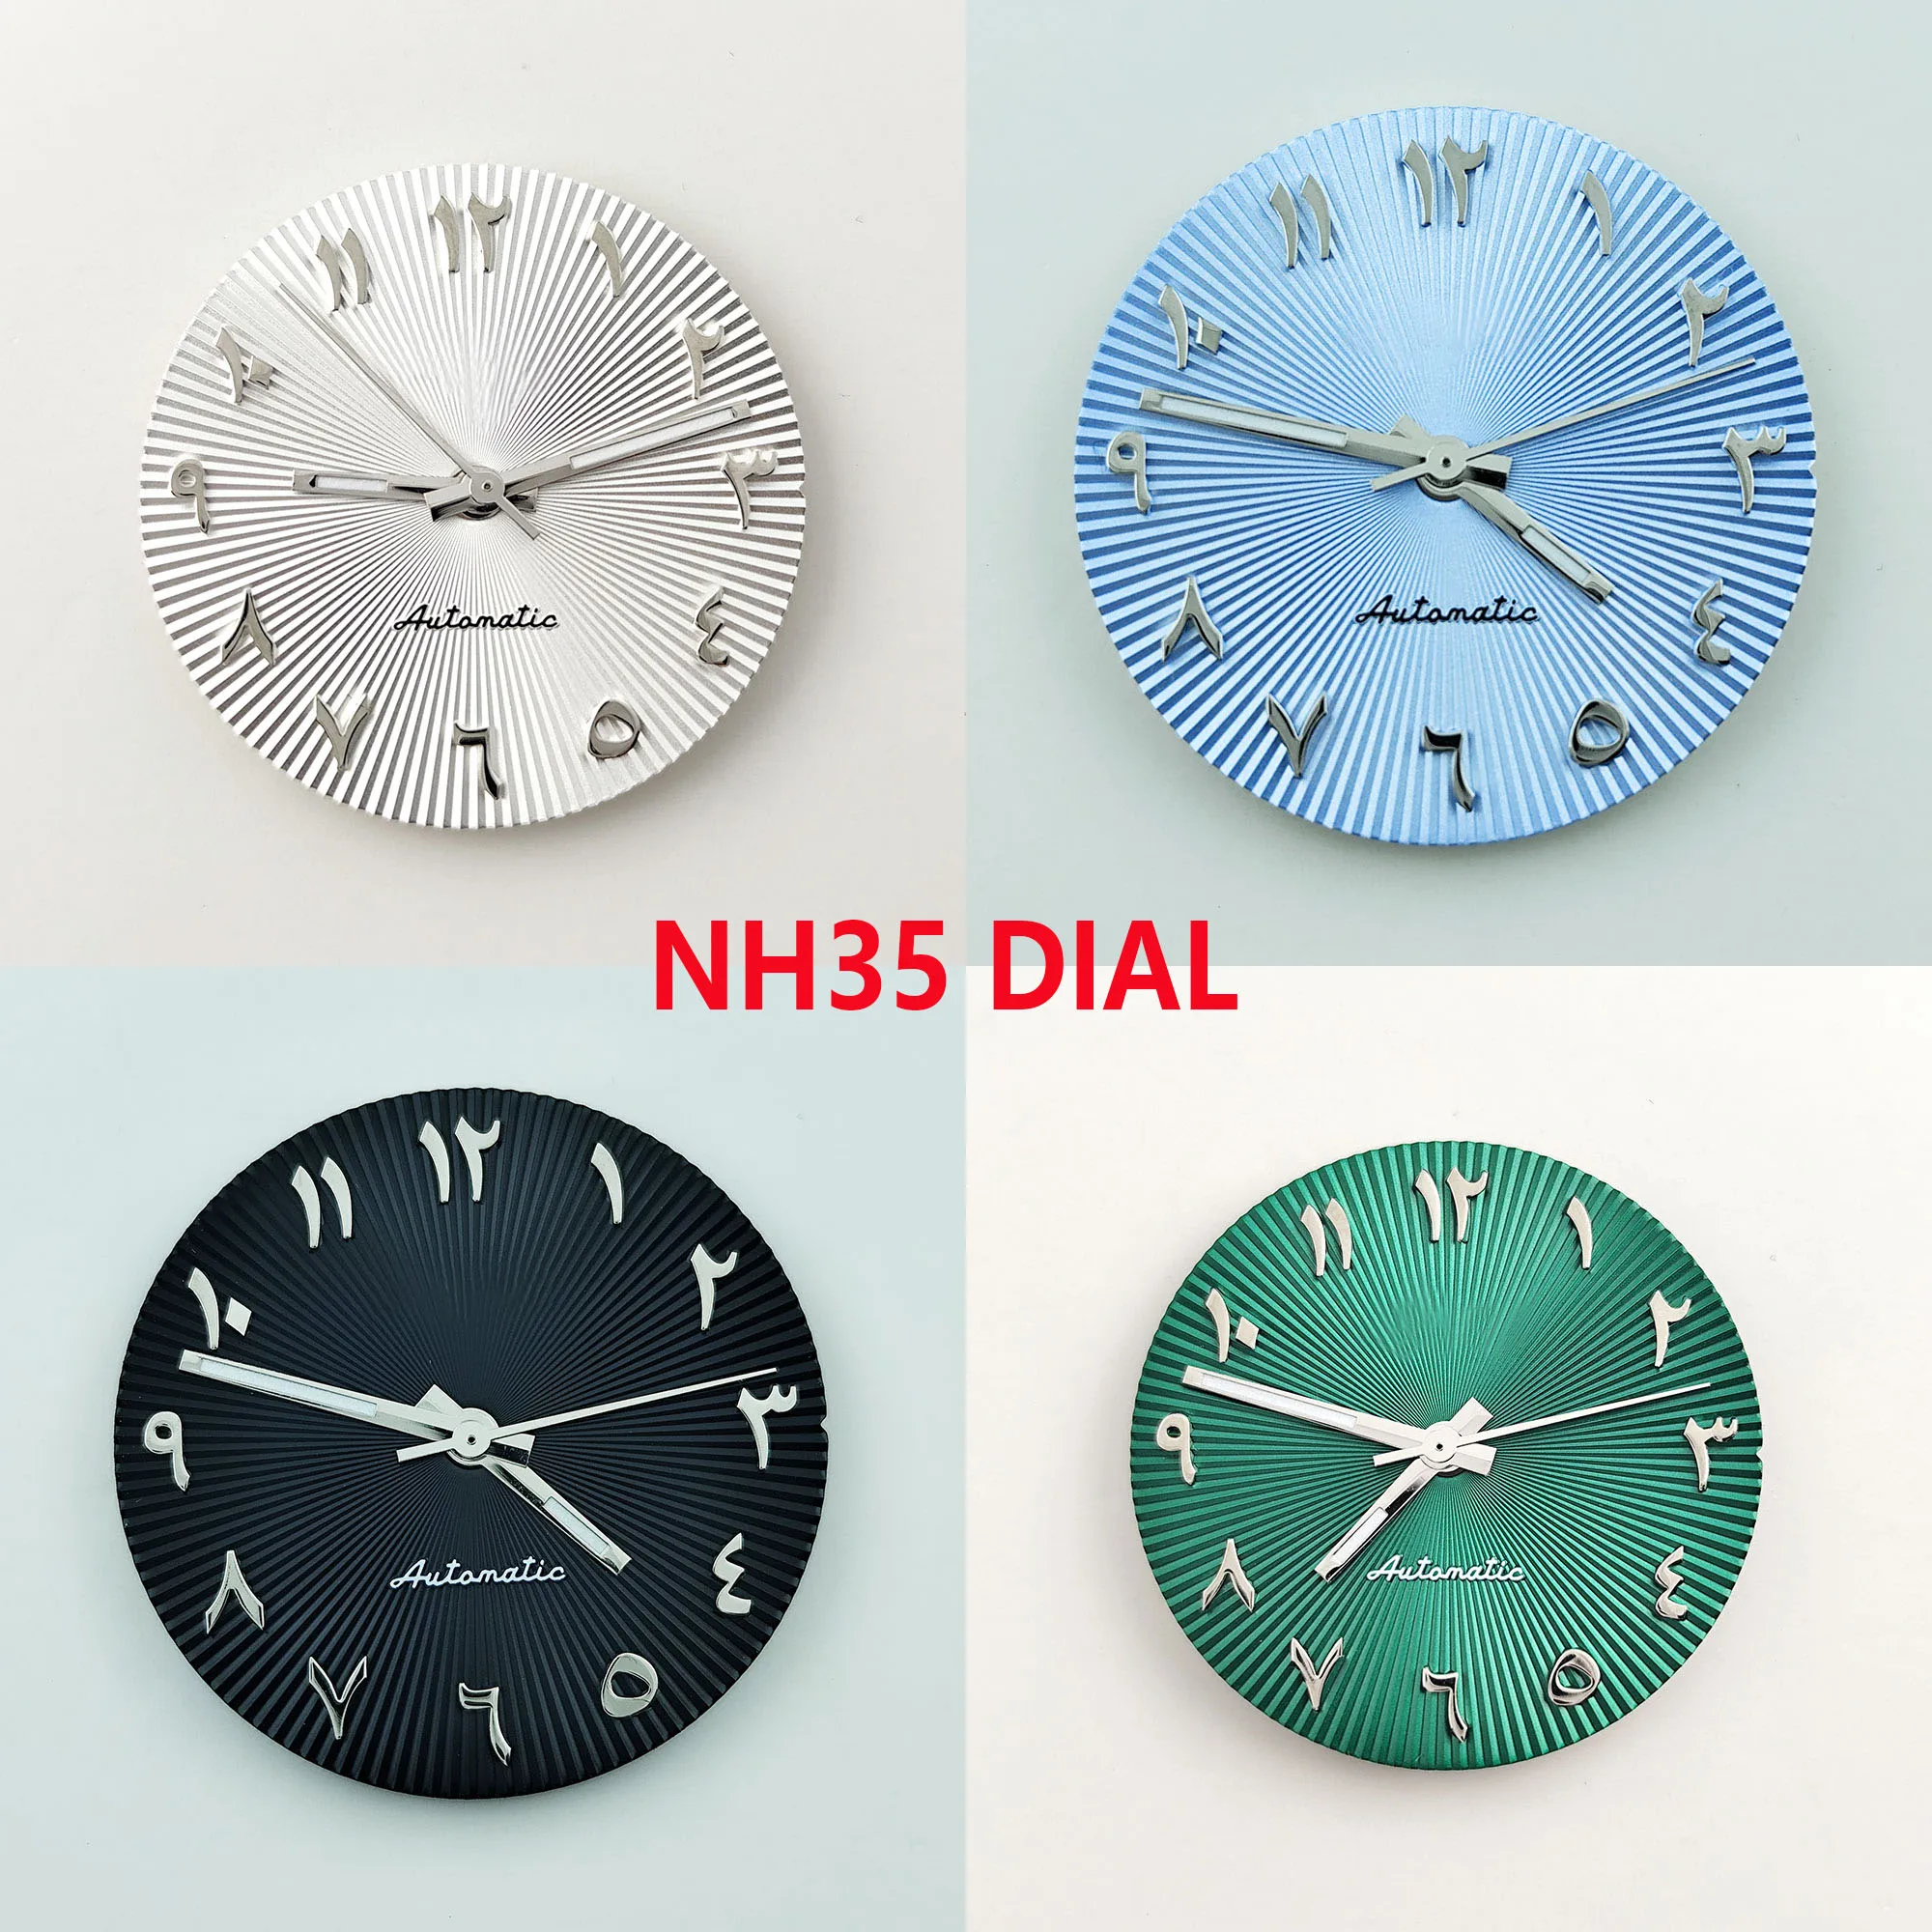 

NH35 dial Arabic numeral watch dial non luminous ripple dial suitable for NH35 NH36 movement watch accessories watch repair tool